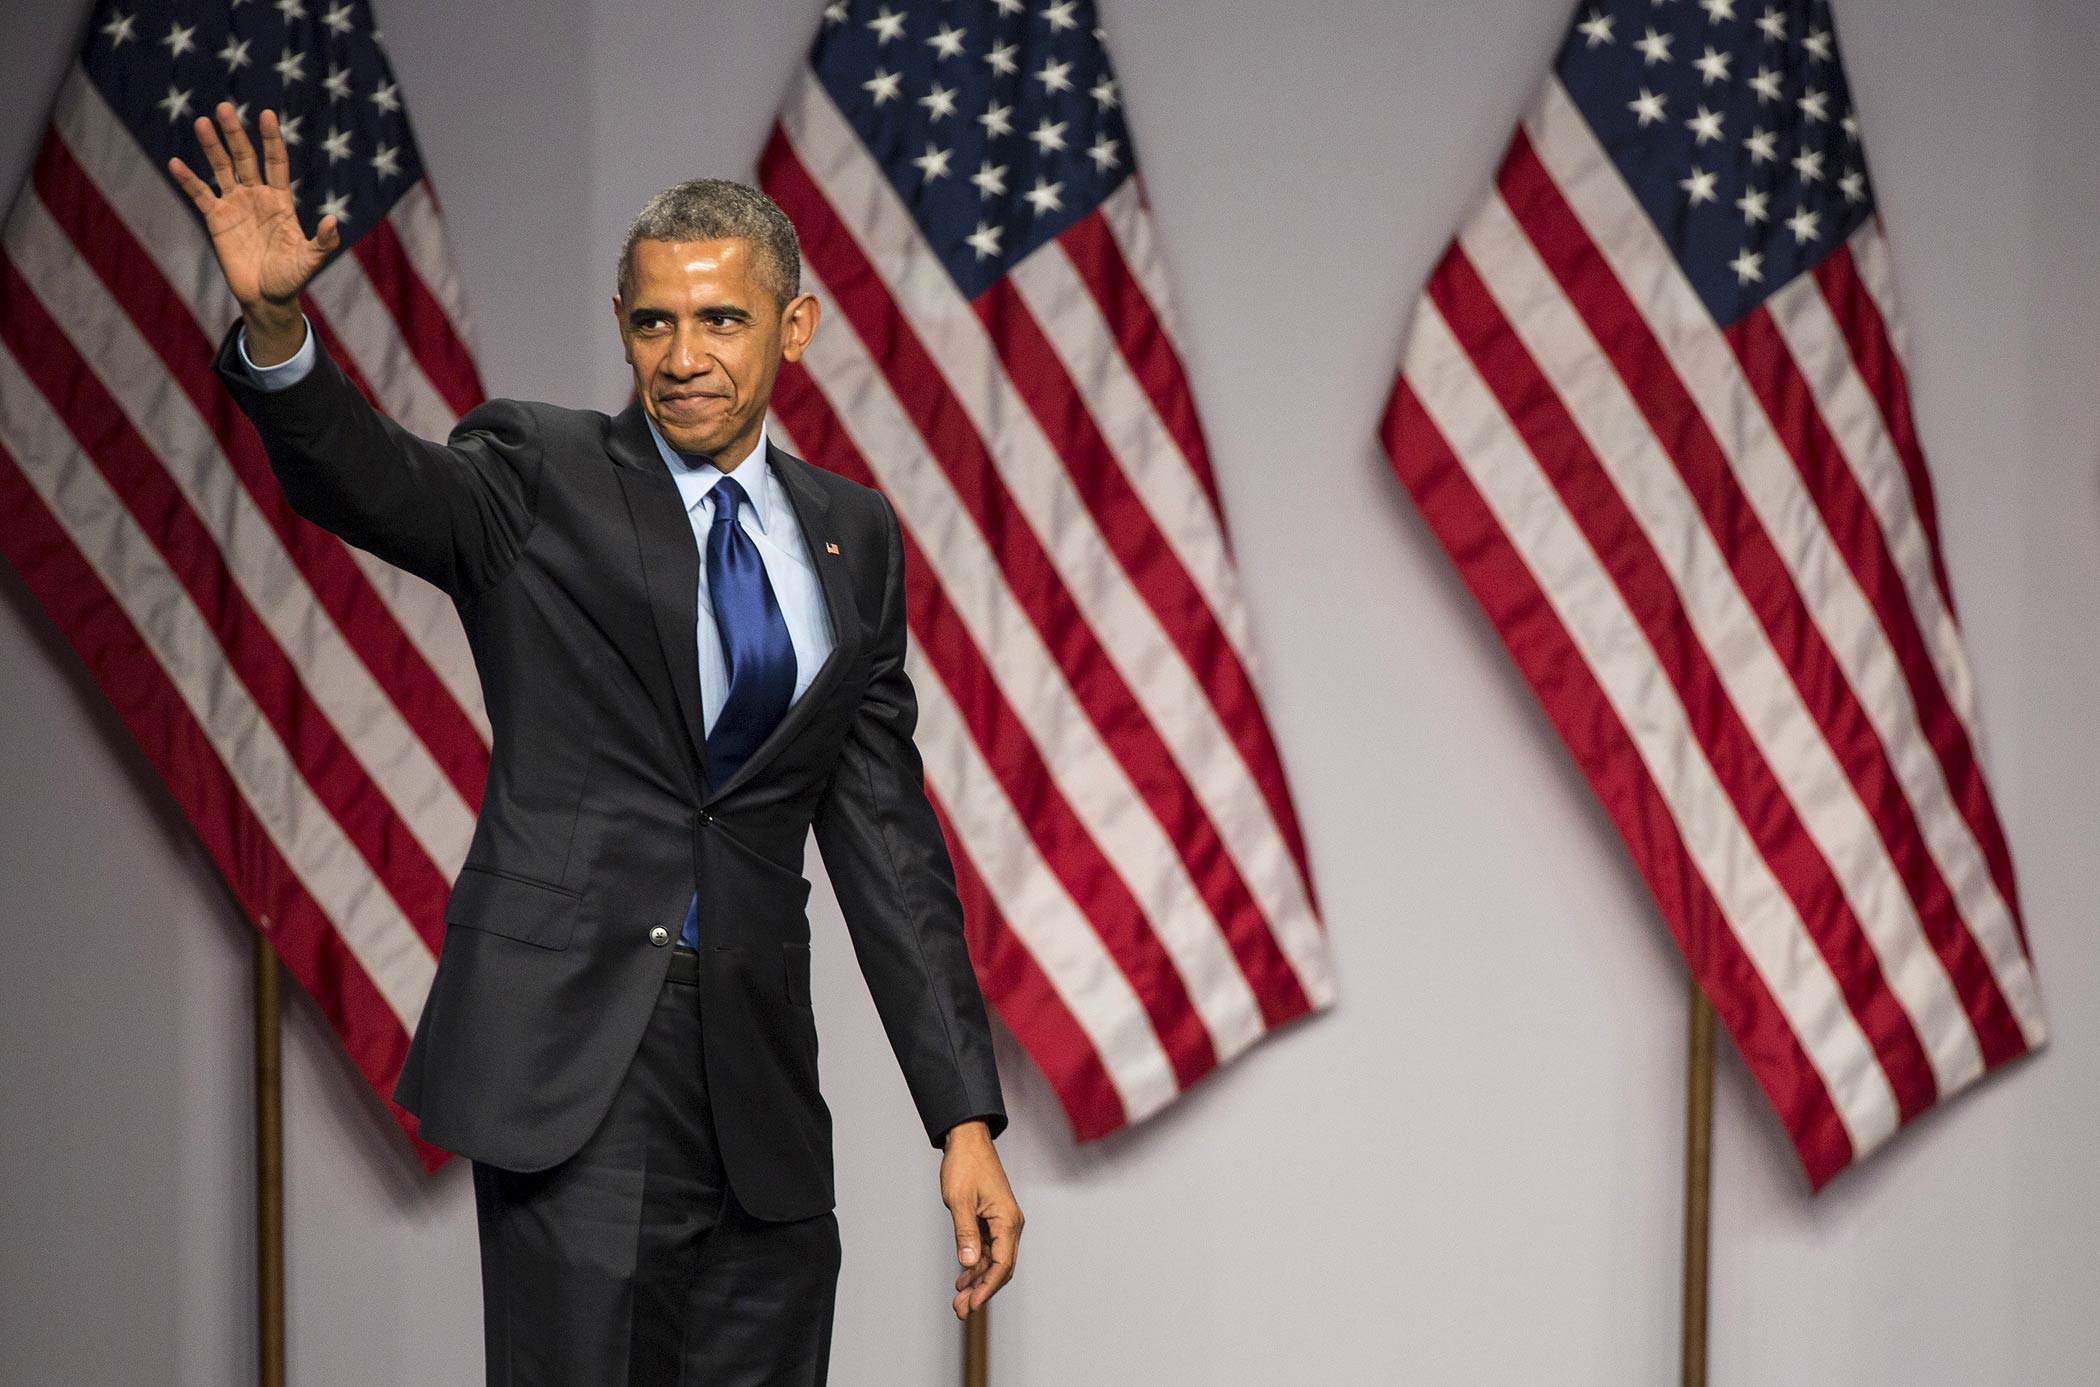 President Barack Obama waves after speaking at the SelectUSA Investment Summit at National Harbor, Md on March 23, 2015. (Joshua Roberts—Reuters)